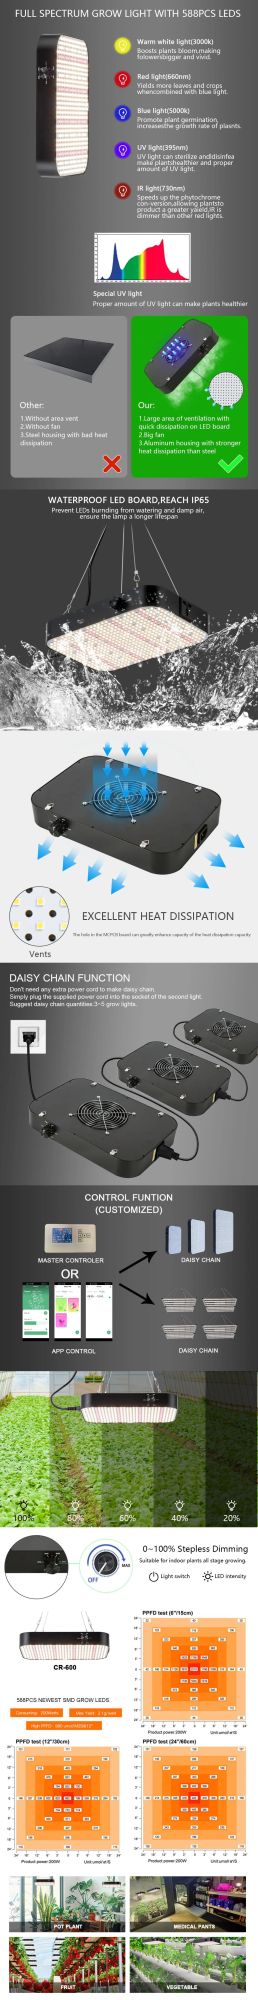 130W Growing Lamps Plants Grow Lighting with Each LED Beads Full Spectrum for Indoor Greenhouse Veg and Blooming